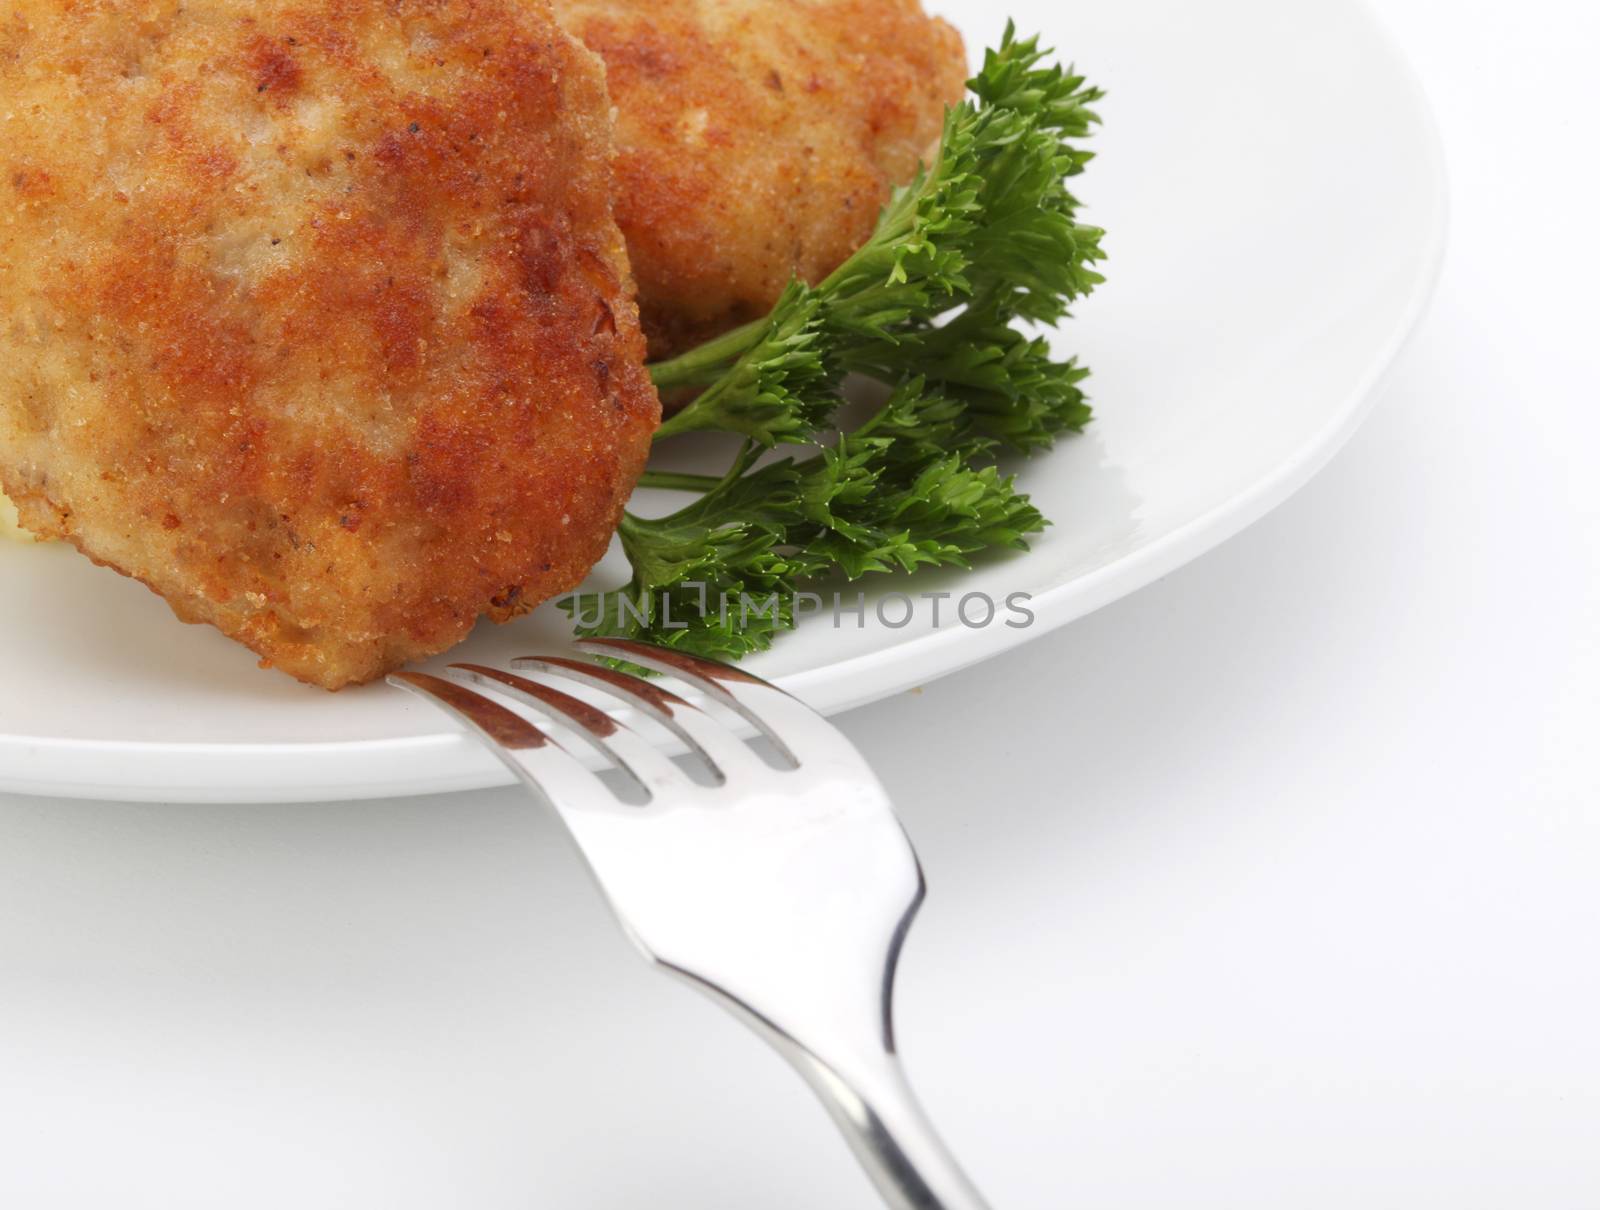 roasted cutlets with fork by rudchenko